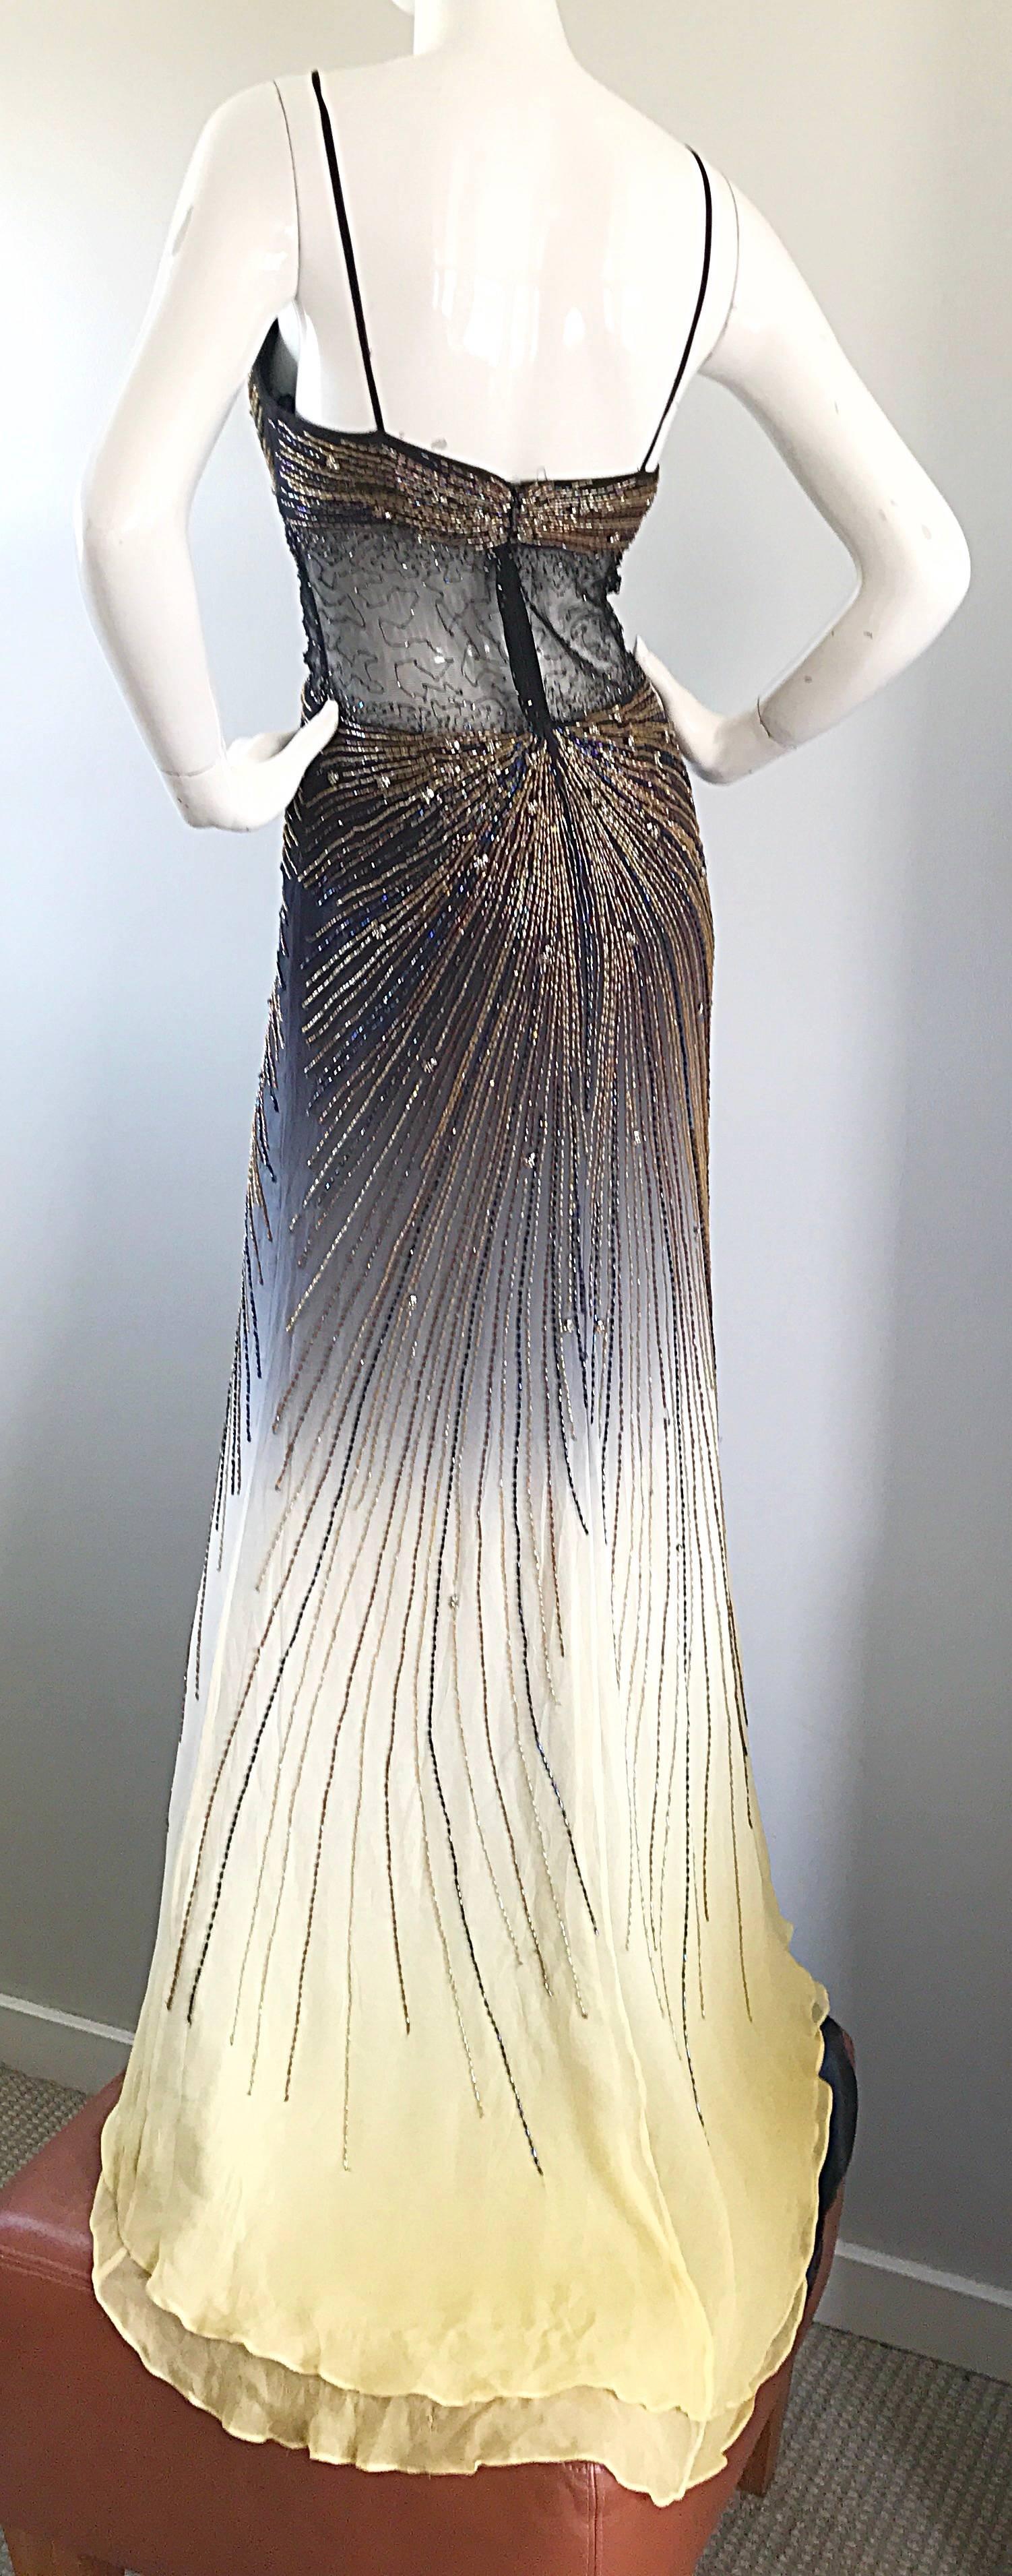 Sexy 1990s Black + Nude Silk Chiffon Beaded Cut - Out Vintage 90s Ombre Gown 1